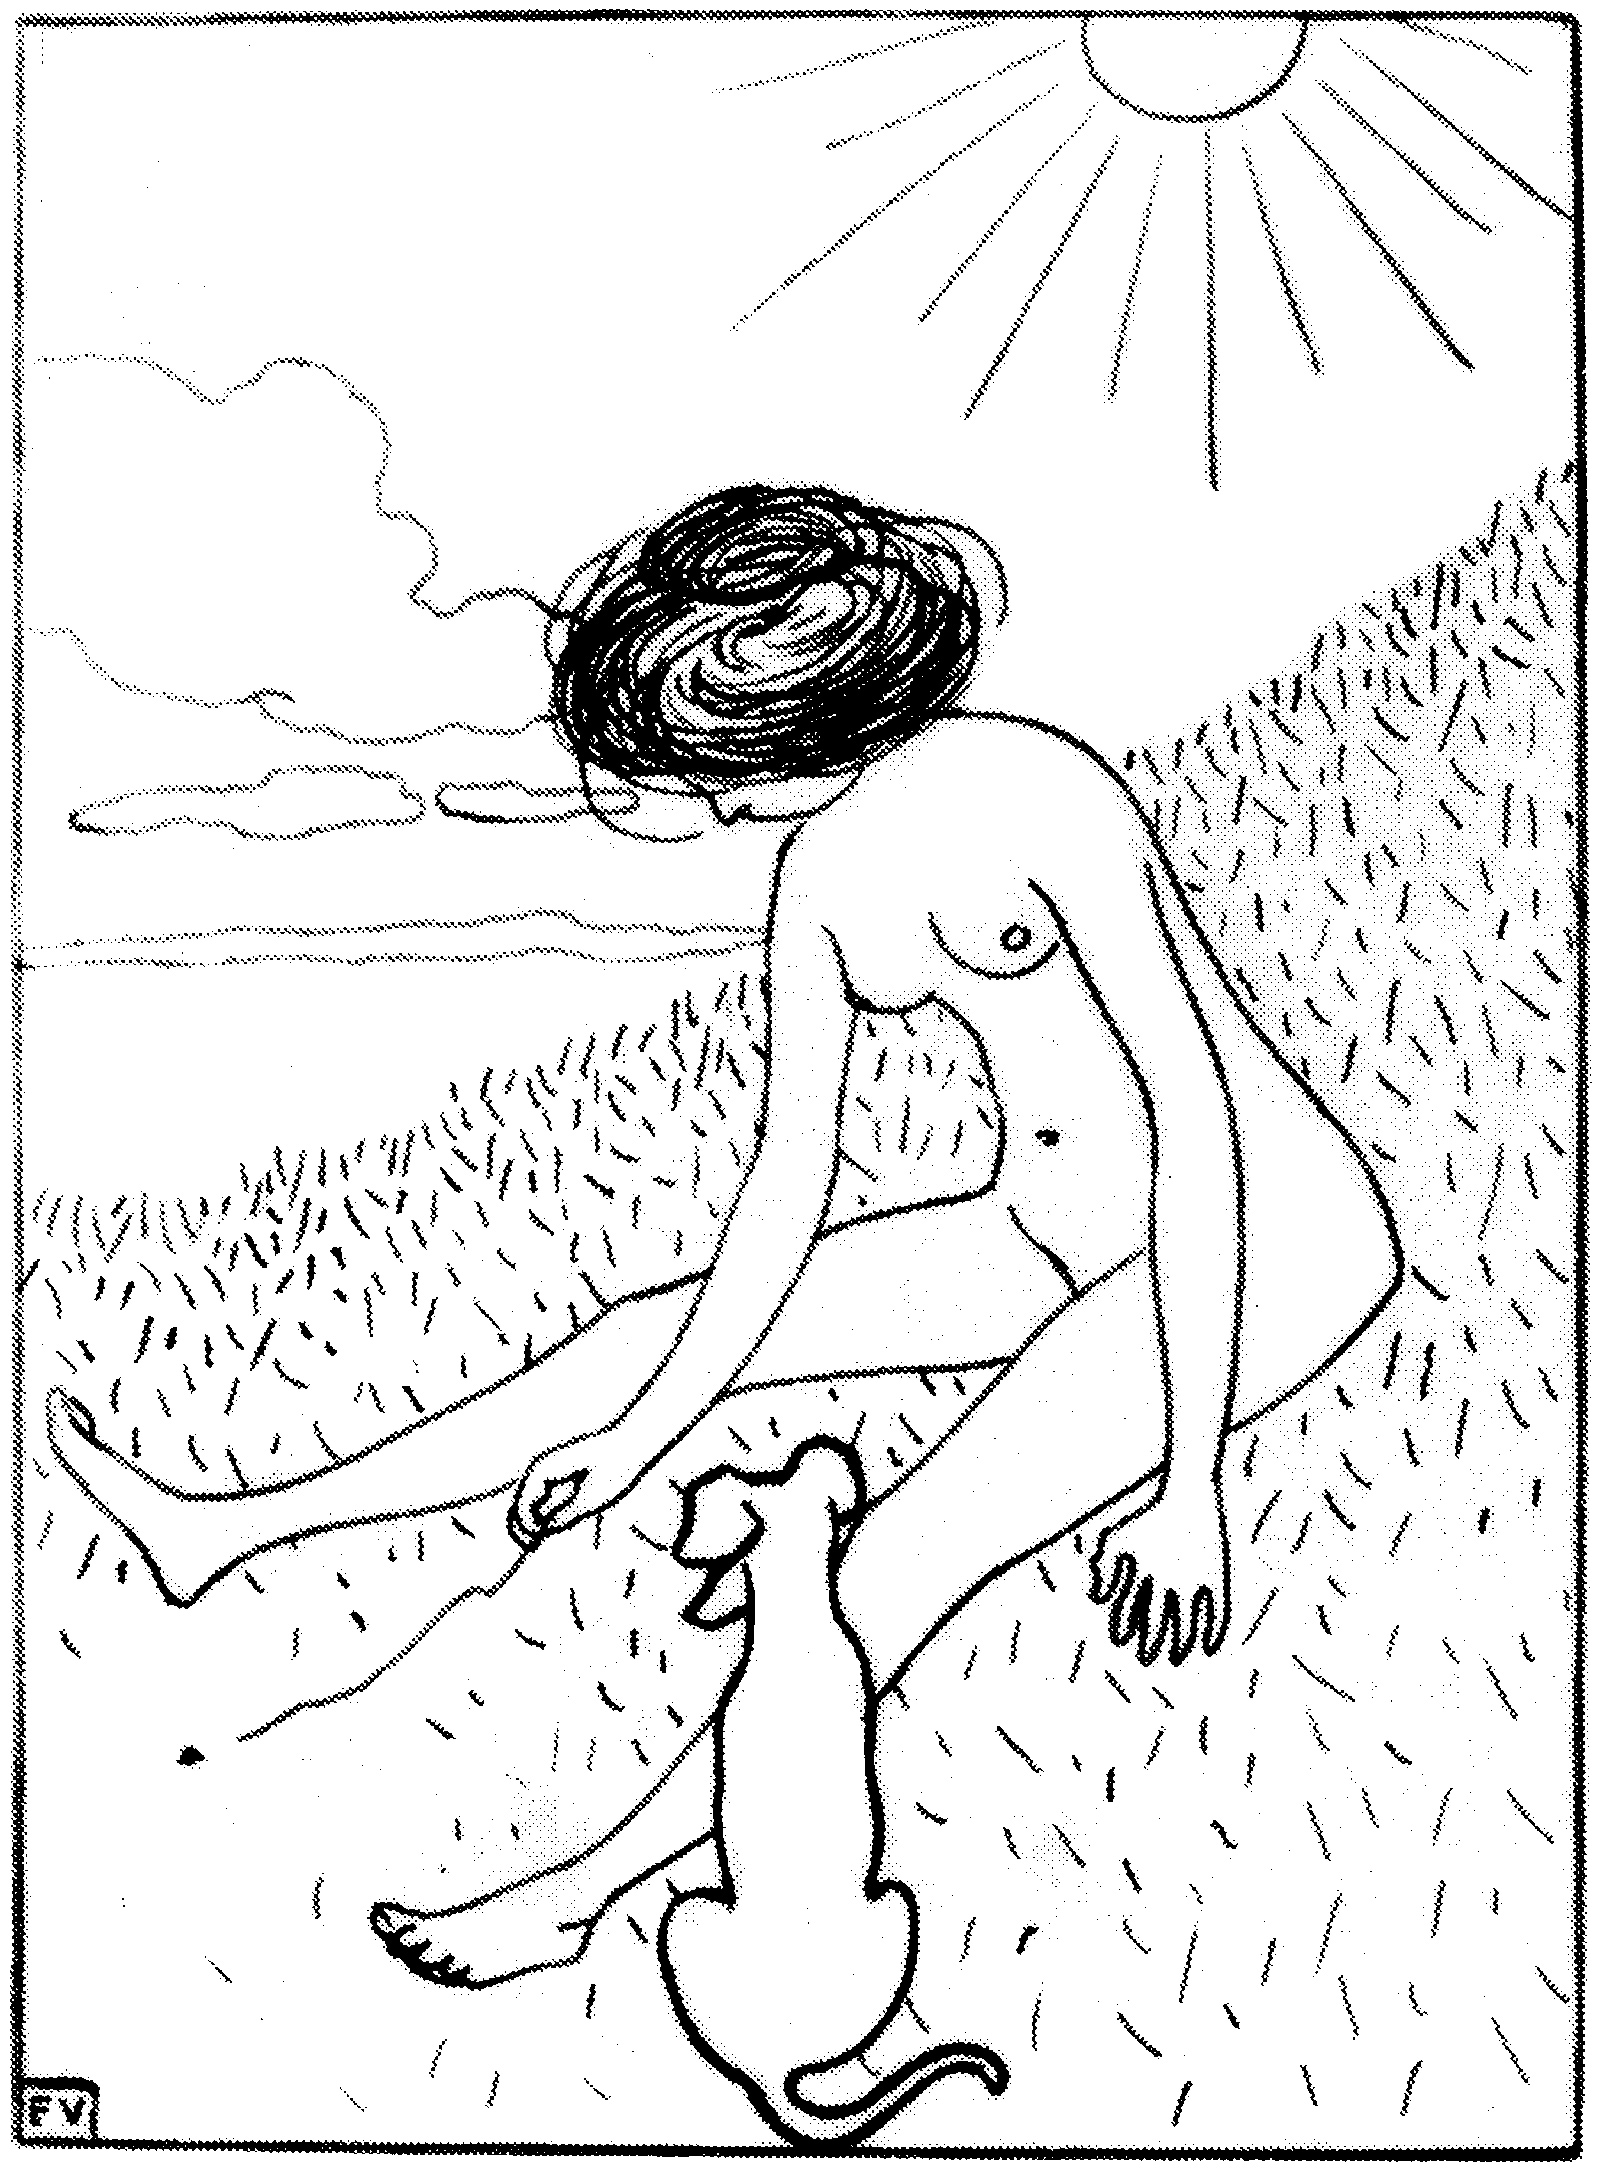 ‘Bather playing with a dog’; drawing by Félix Vallotton